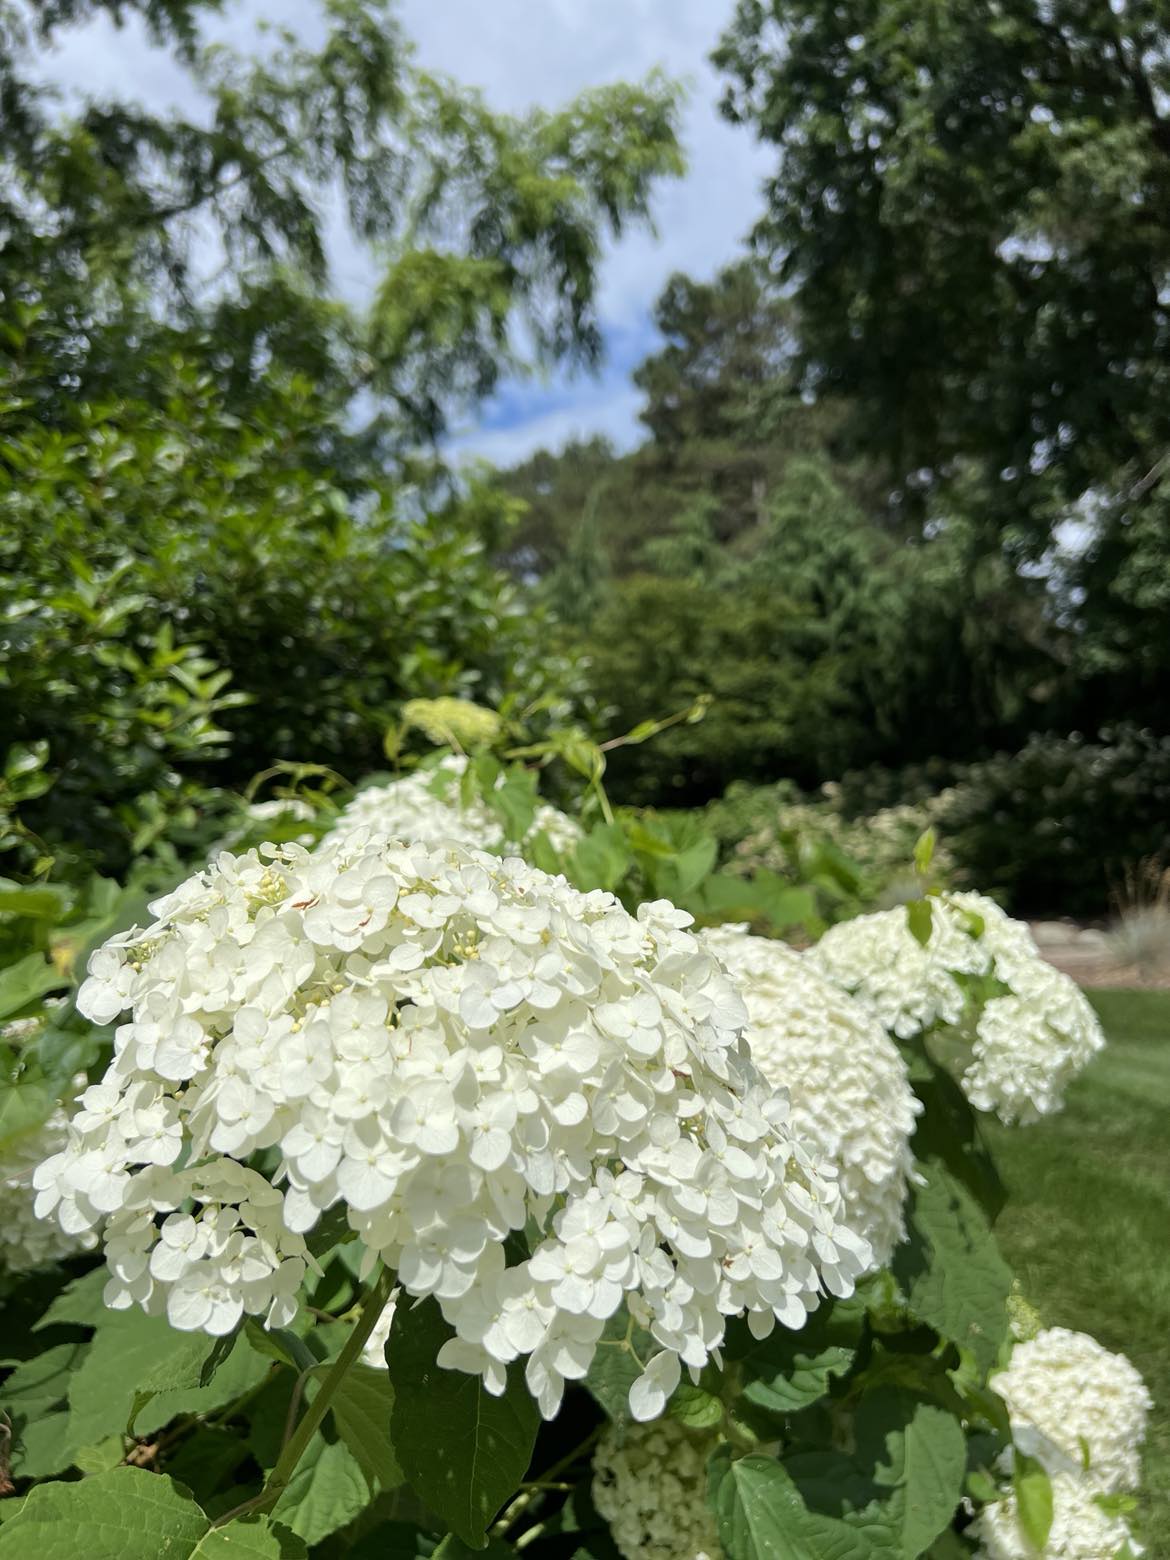 Close-up of a white hydrangea cluster in full bloom at Applewood Estate, surrounded by green foliage with trees in the background under a partly cloudy sky, part of the beautiful grounds maintained by the Ruth Mott Foundation.